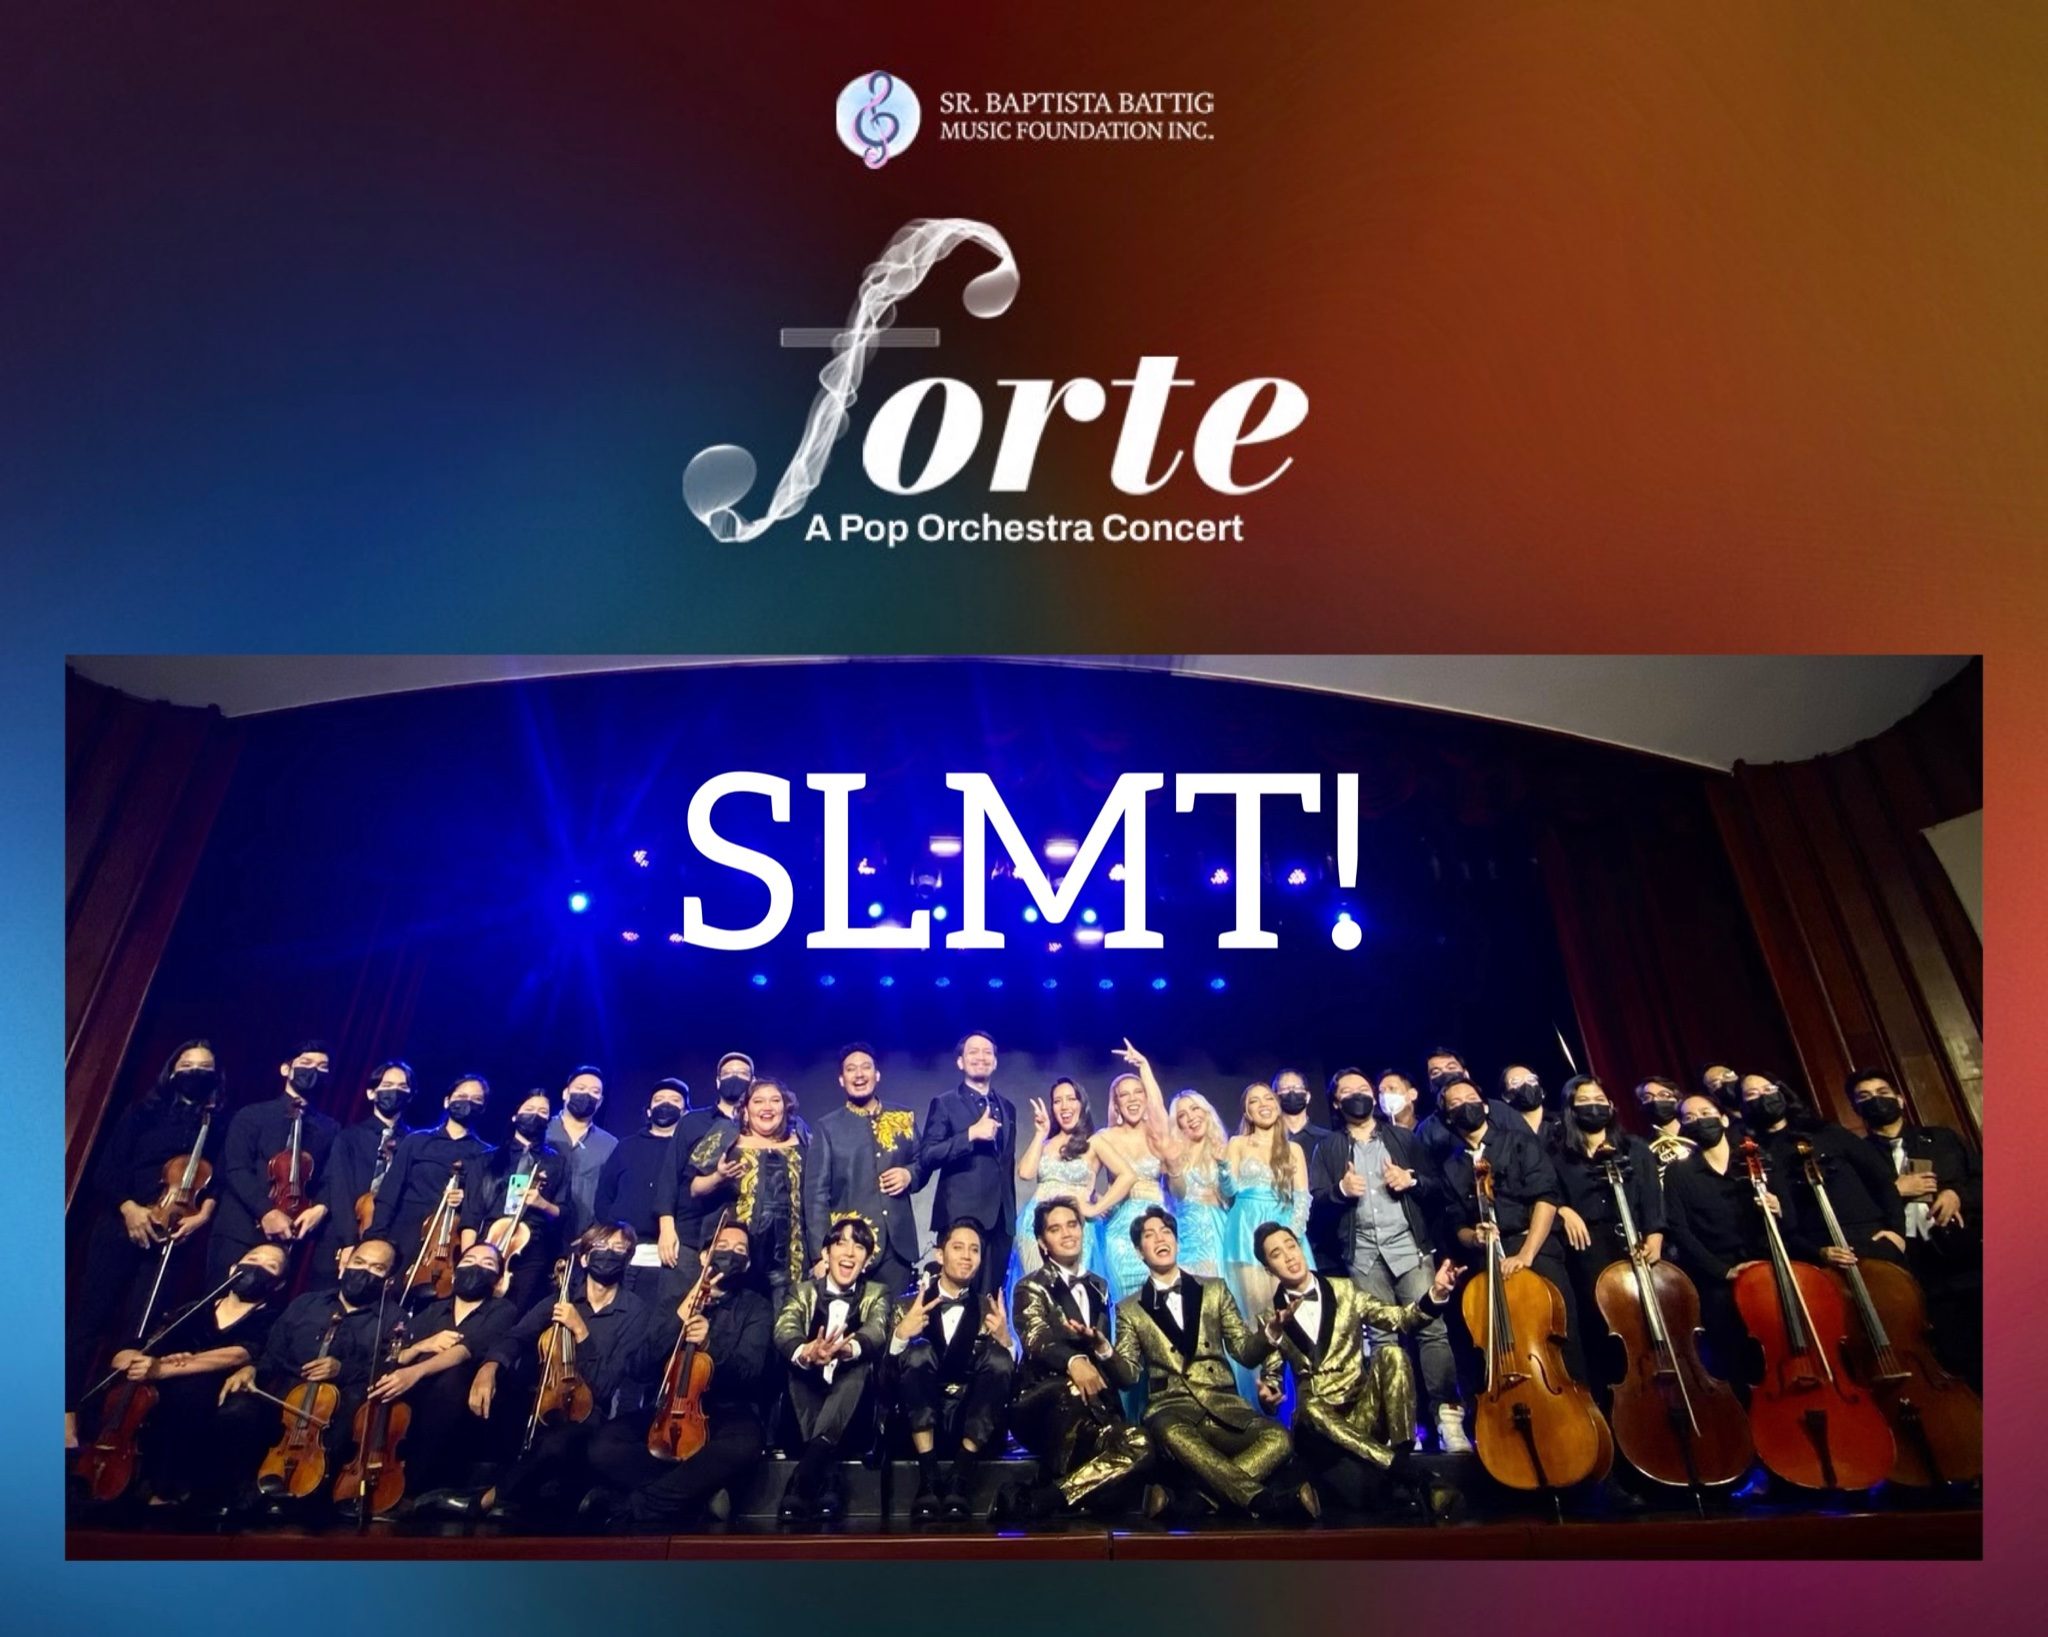 ‘Forte: The Pop Orchestra’: SB19, 4th Impact shine with classical arrangements